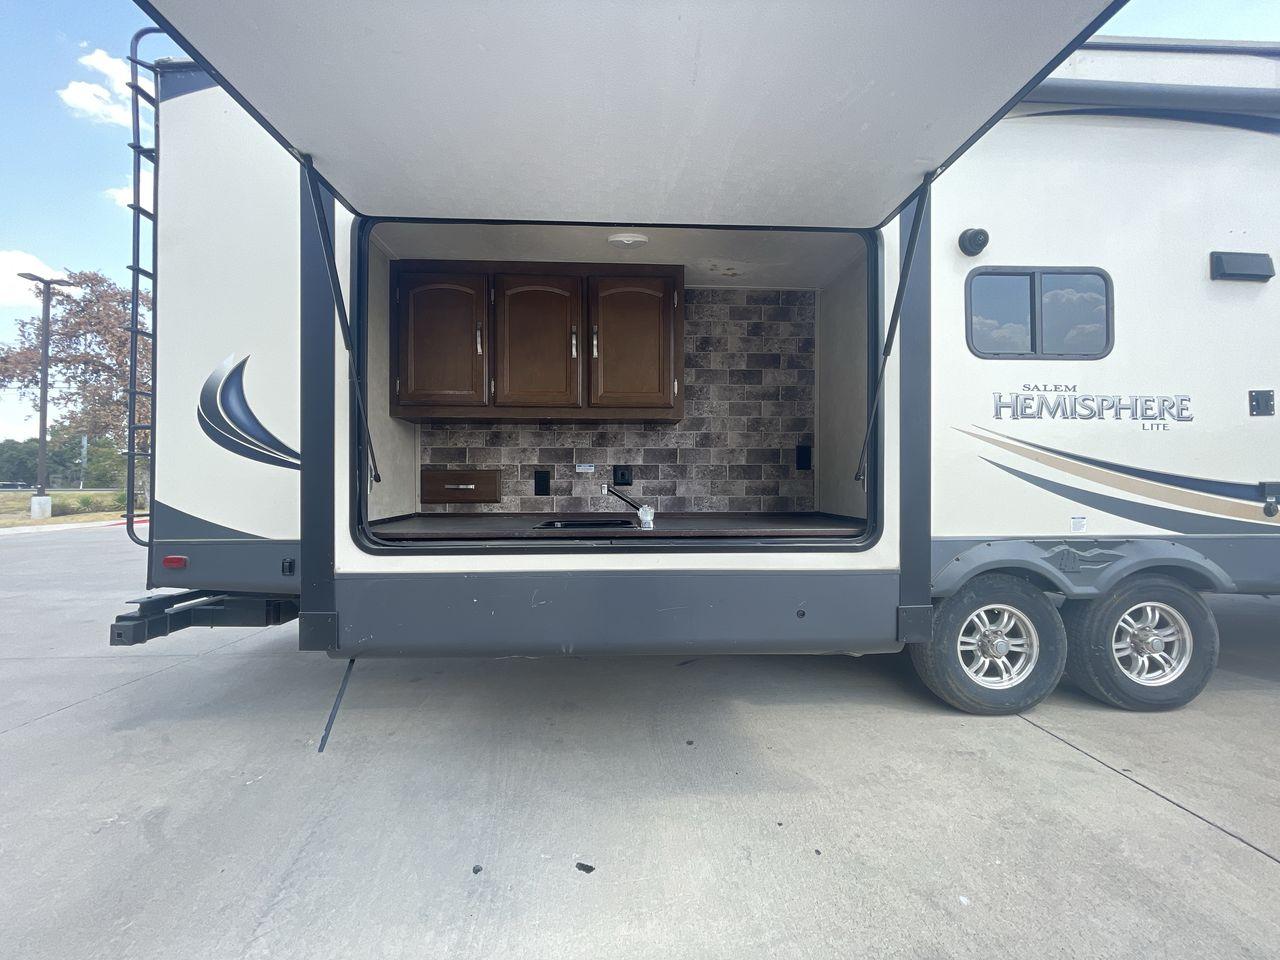 2016 TAN FOREST RIVER SALEMHEMISPHERE356QB (4X4FSBM24GU) , Length: 34 ft | Dry Weight: 7,294 lbs | Slides: 2 transmission, located at 4319 N Main St, Cleburne, TX, 76033, (817) 678-5133, 32.385960, -97.391212 - This 2016 Forest River Salem Hemisphere Travel Trailer measures just over 34 feet long and 8 feet wide with a dry weight of 7,294 lbs. It has a payload capacity of 2,351 lbs and a hitch weight of 845 lbs. This unit also comes with an automatic heating and cooling rate of 30,000 and 13,500 BTUs, resp - Photo #22